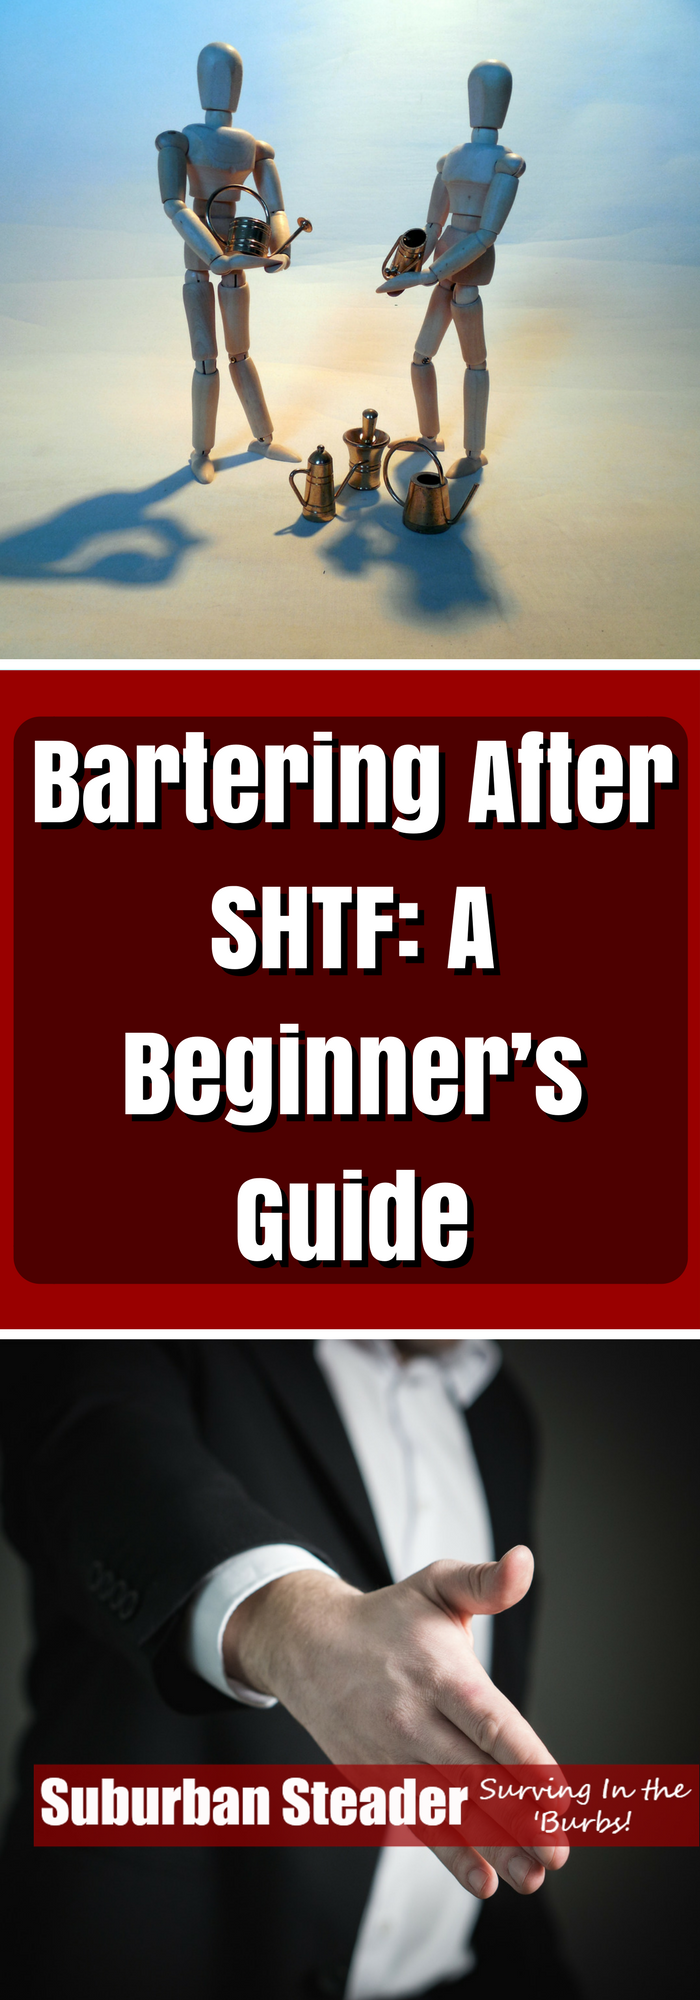 You may have put a lot of thought into what will happen after a major disaster but are you prepared for bartering after SHTF? What will you trade?